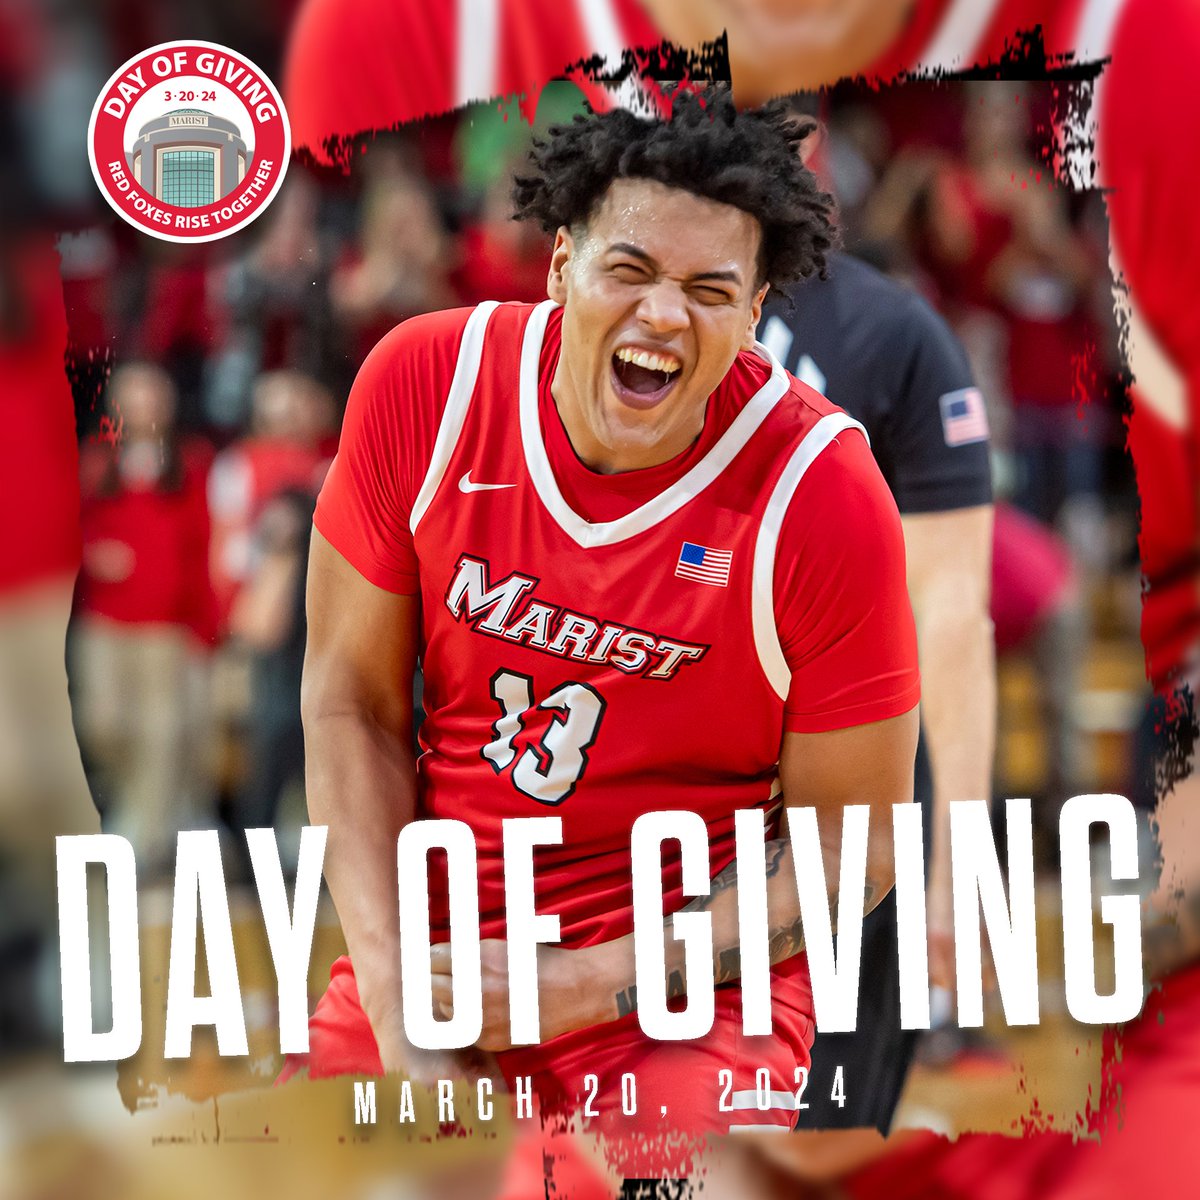 Red Foxes Rise Together! Join us on Marist's FIRST-EVER Day of Giving (3/20) & make a gift to support the future of Marist! Every donation counts! #MaristDayOfGiving #RedFoxesRiseTogether DONATE: givecampus.com/56h59z